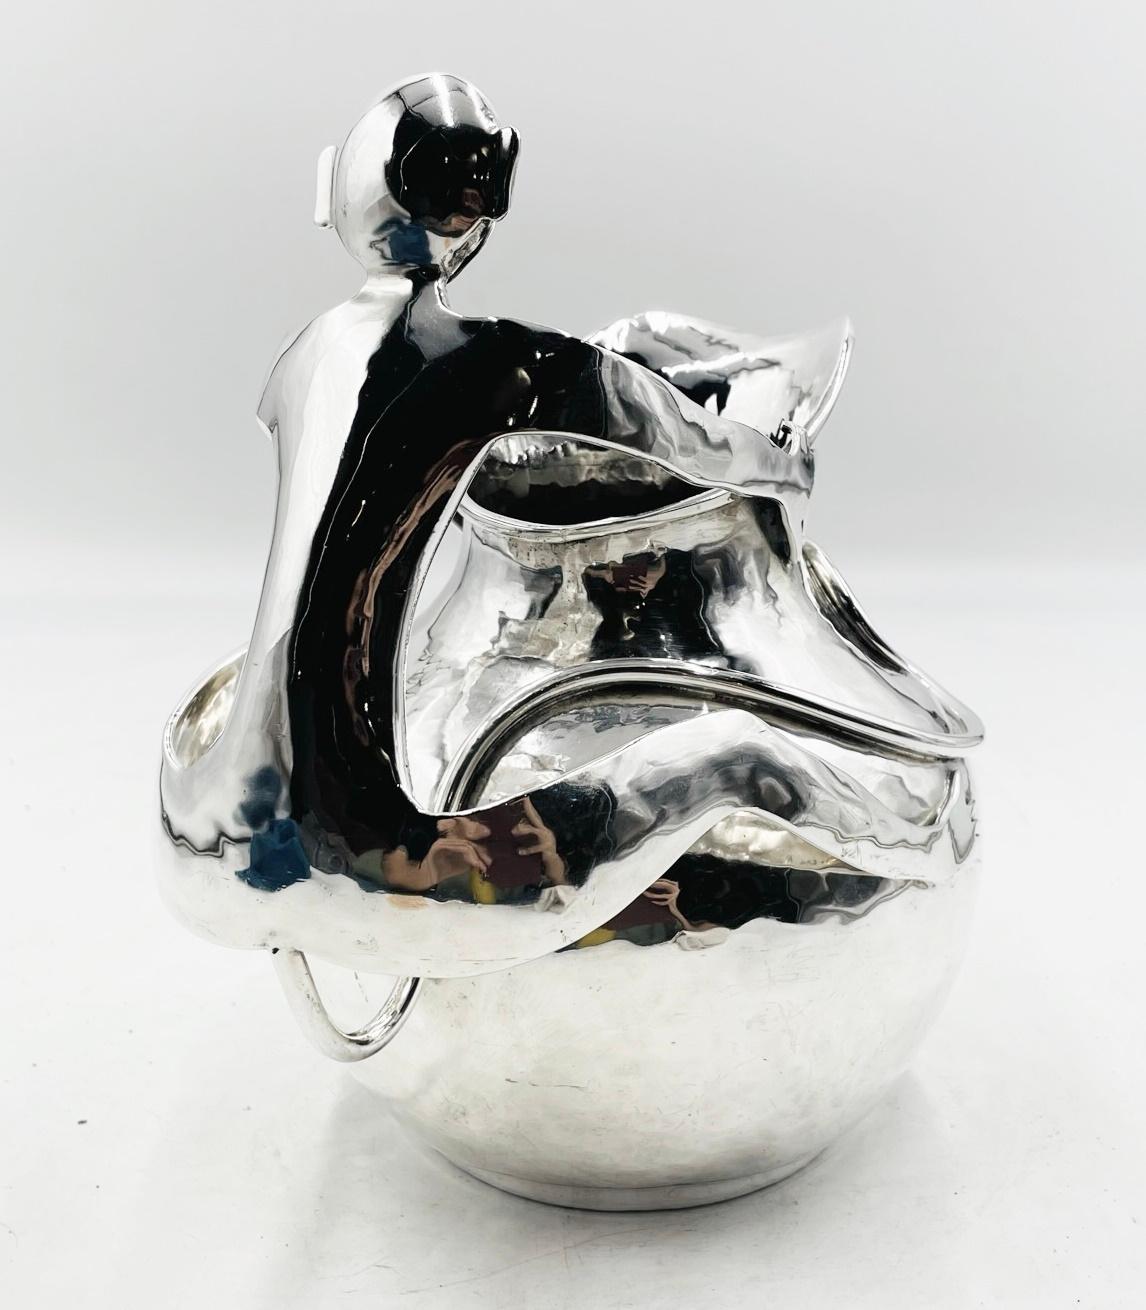 Introducing the exquisite Vintage Silver-Plated Pitcher with a Monkey Handle by Emilia Castillo, Mexico 85, Signed. This extraordinary piece of art seamlessly combines traditional craftsmanship with a playful touch, making it a true centerpiece for